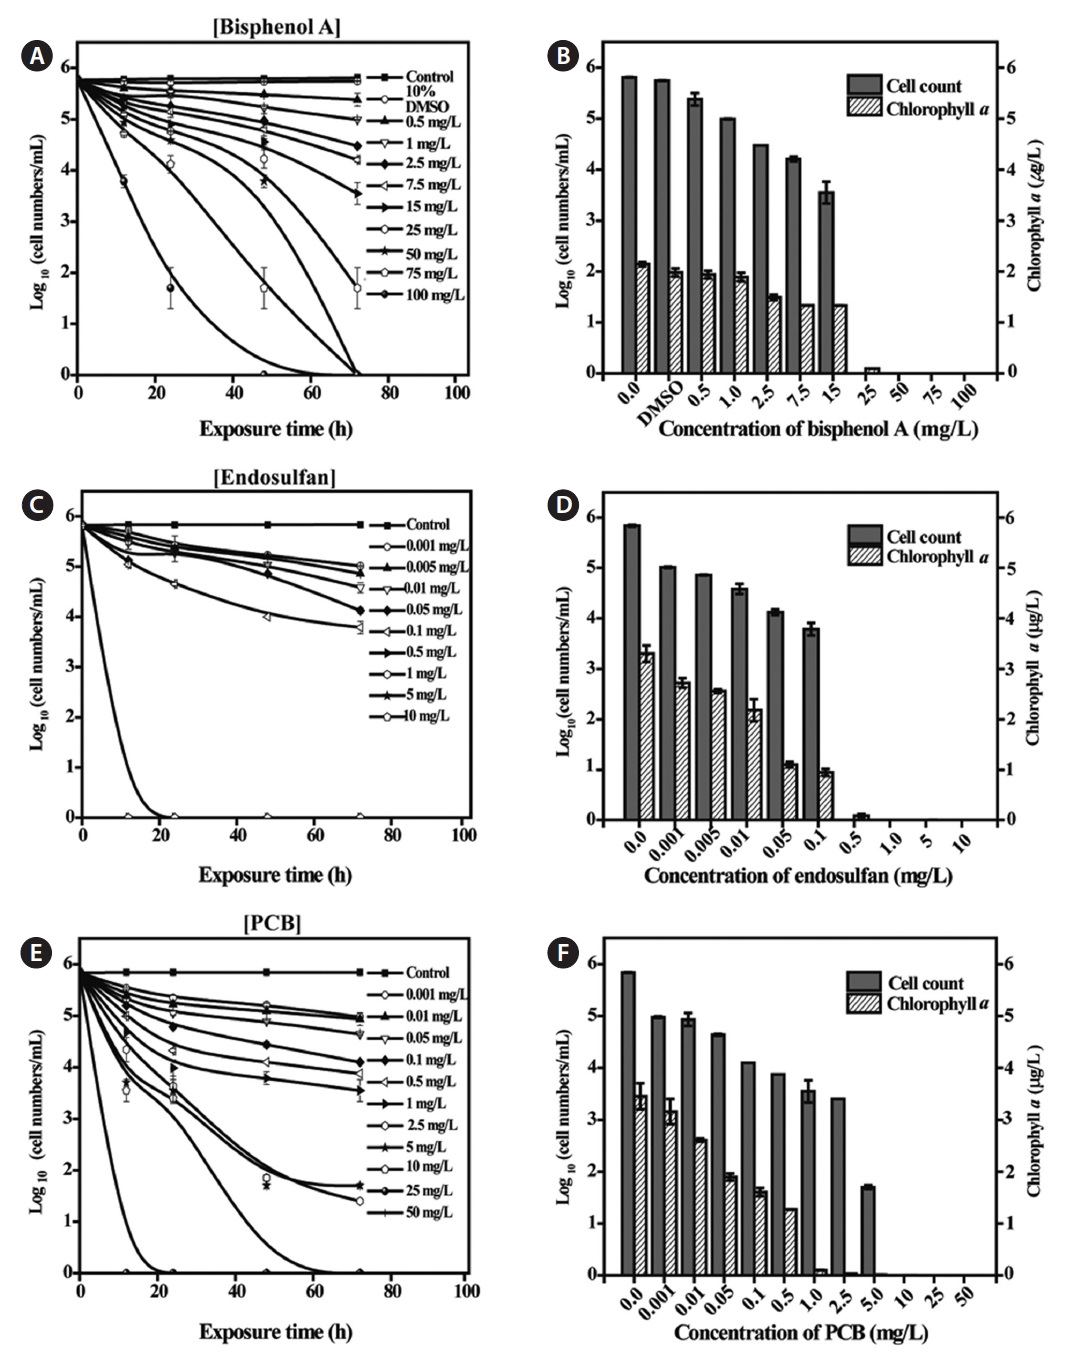 Variation in cell count of Tetraselmis suecica following exposure to endocrine-disrupting chemicals (EDCs). (A, C, E) Variation in cell numbers following exposure to EDCs. (B, D, F) Variation in cell count and chlorophyll a following 72-h exposure to EDCs. PCB, polychlorinated biphenyl.